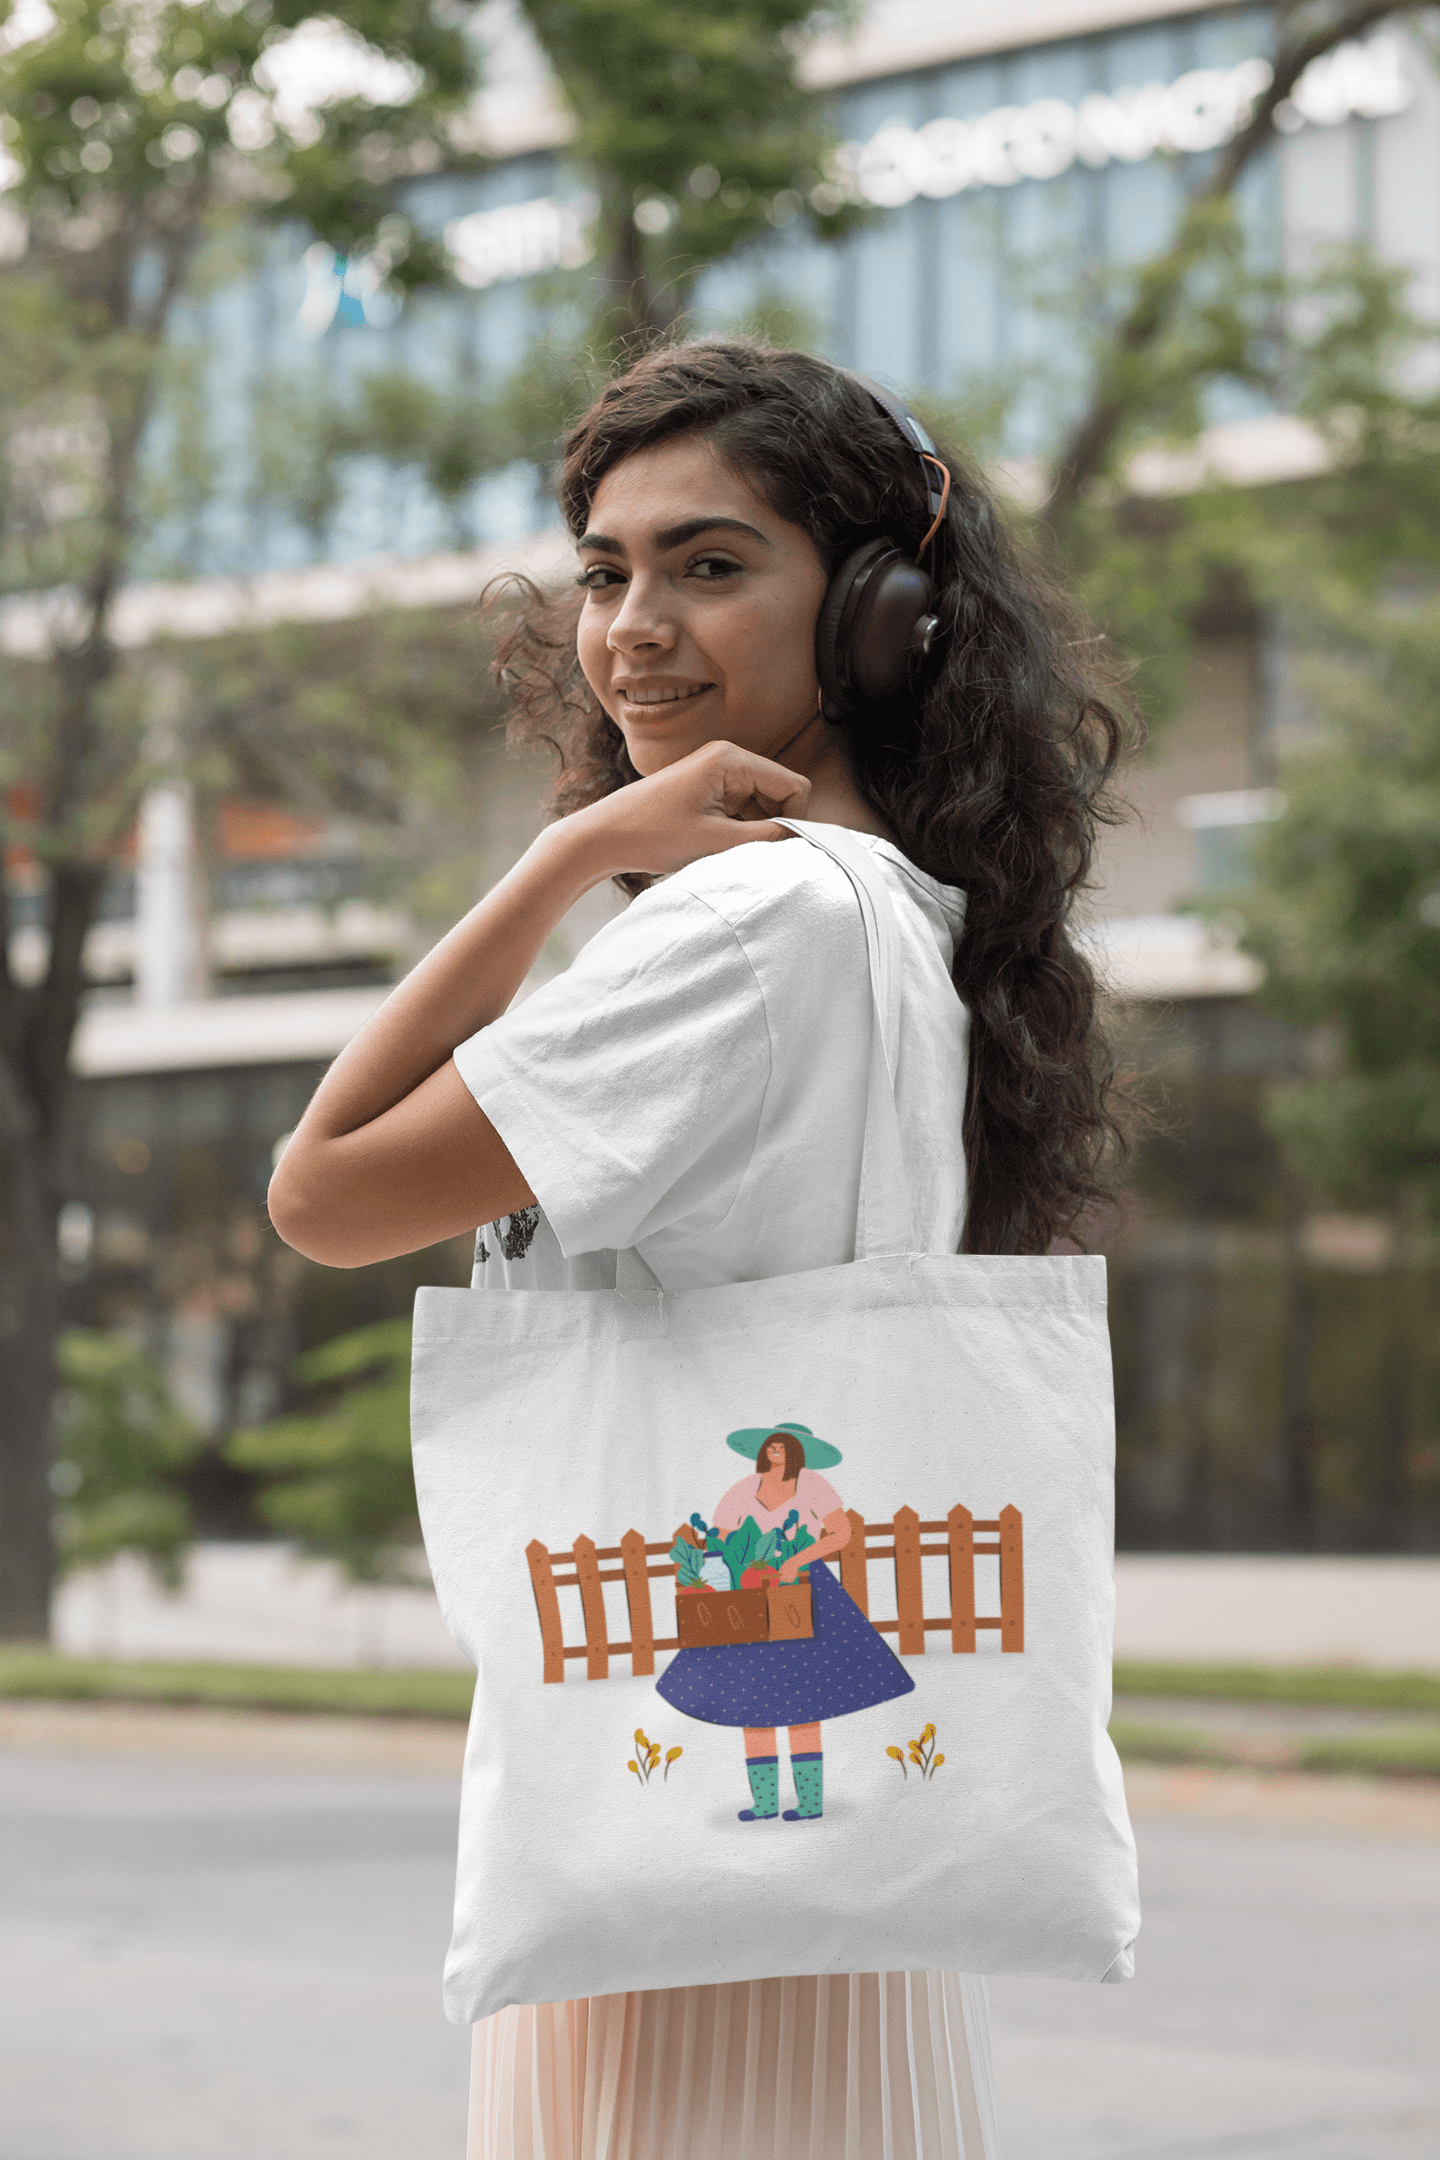 Outdoorsy Tote Bag - The Accessorys Official